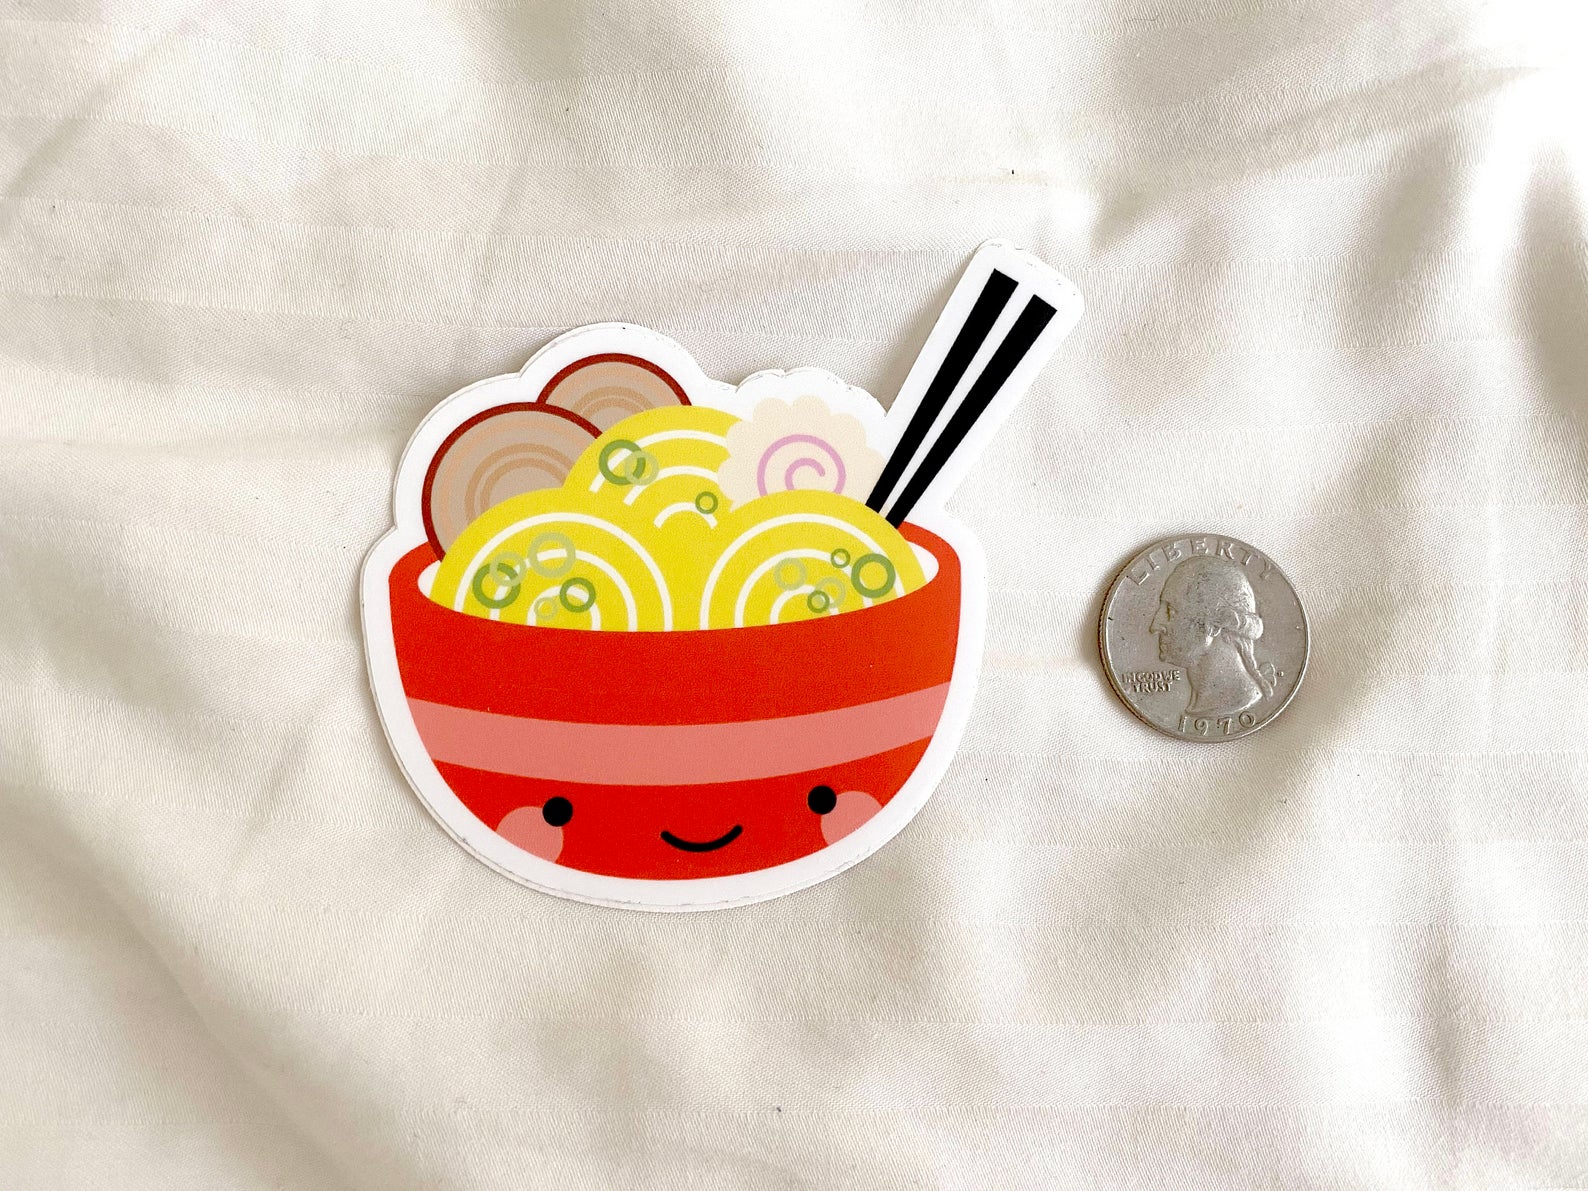 One ramen sticker next to quarter for scale on a white cloth background.